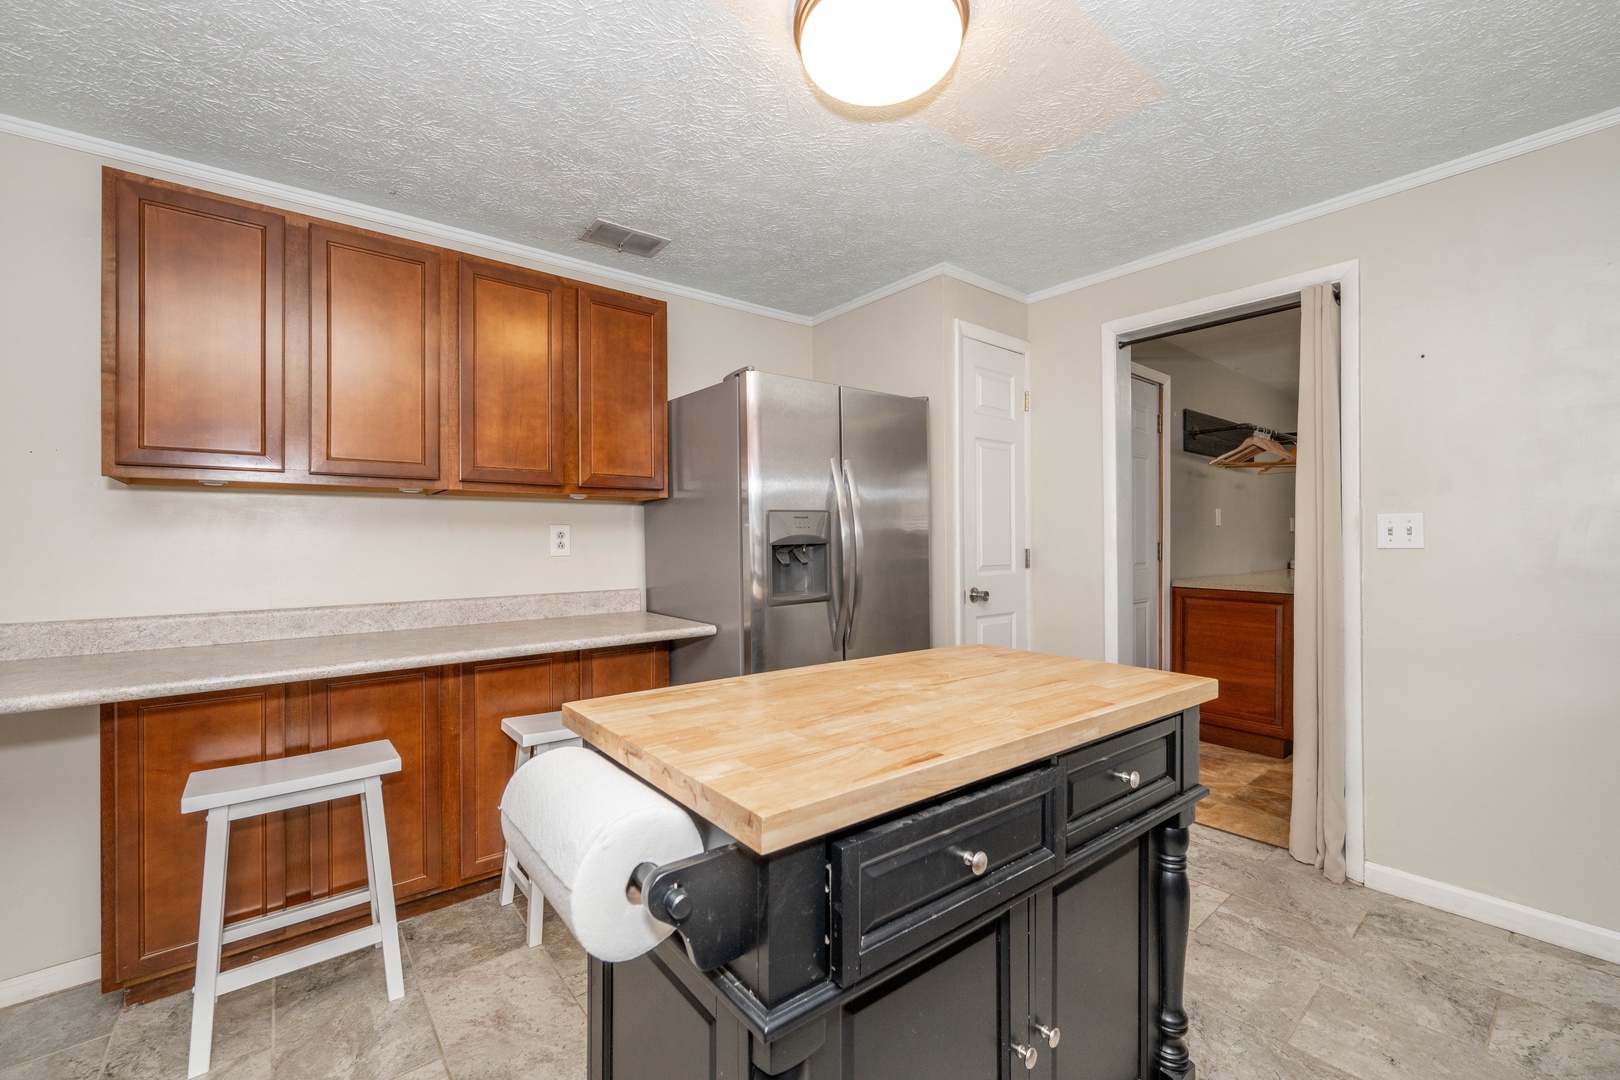 The spacious kitchen offers ample storage & all the comforts of home